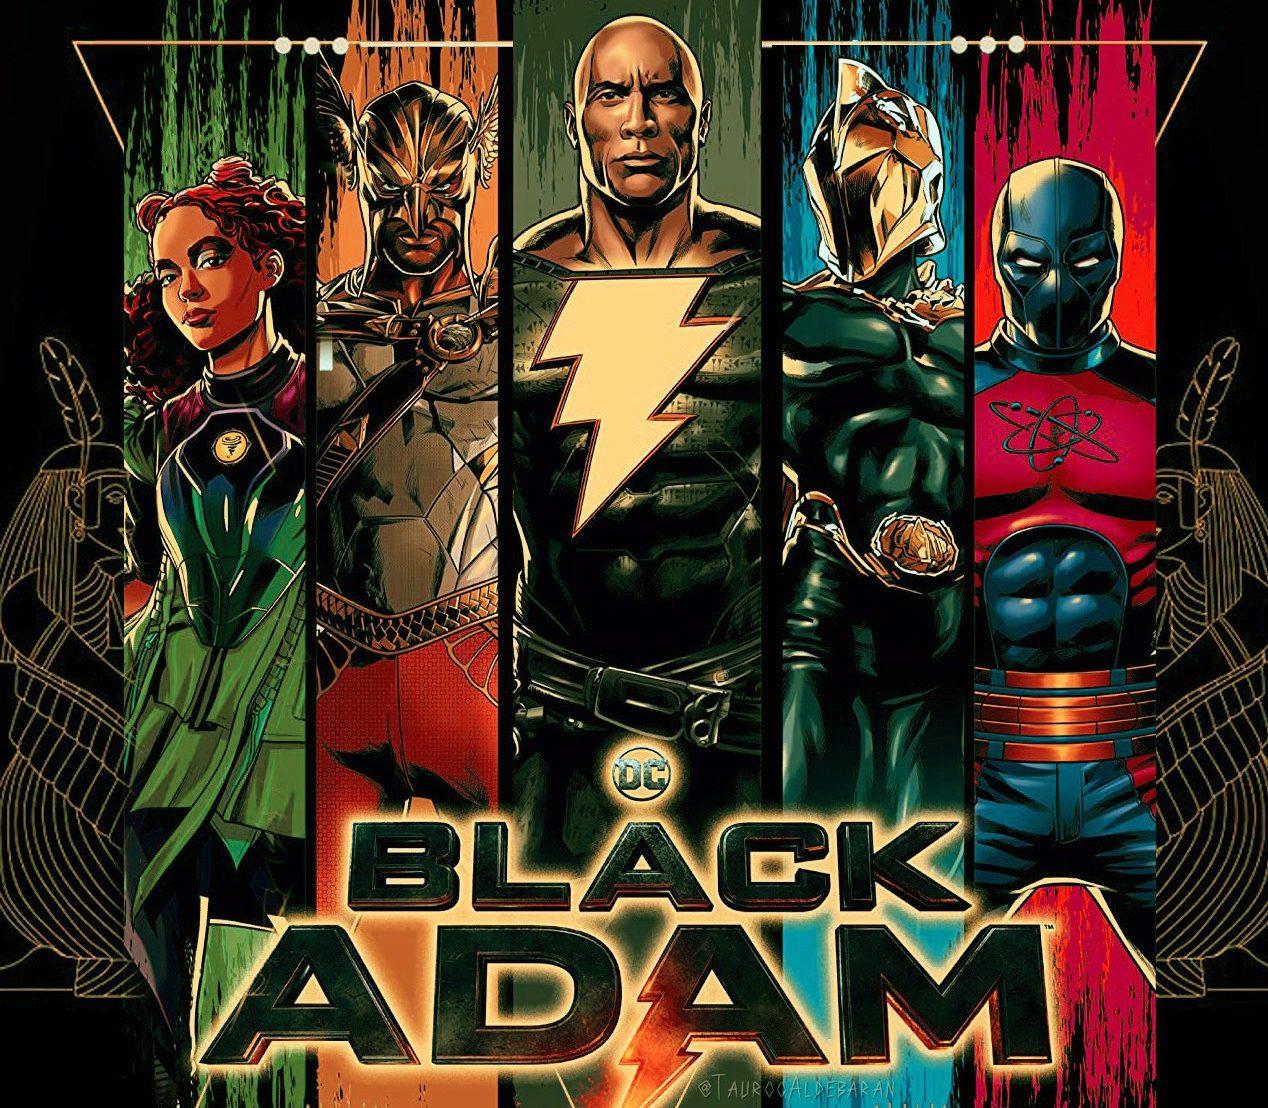 Black Adam New Posters - Featuring Black Adam and the JSA!